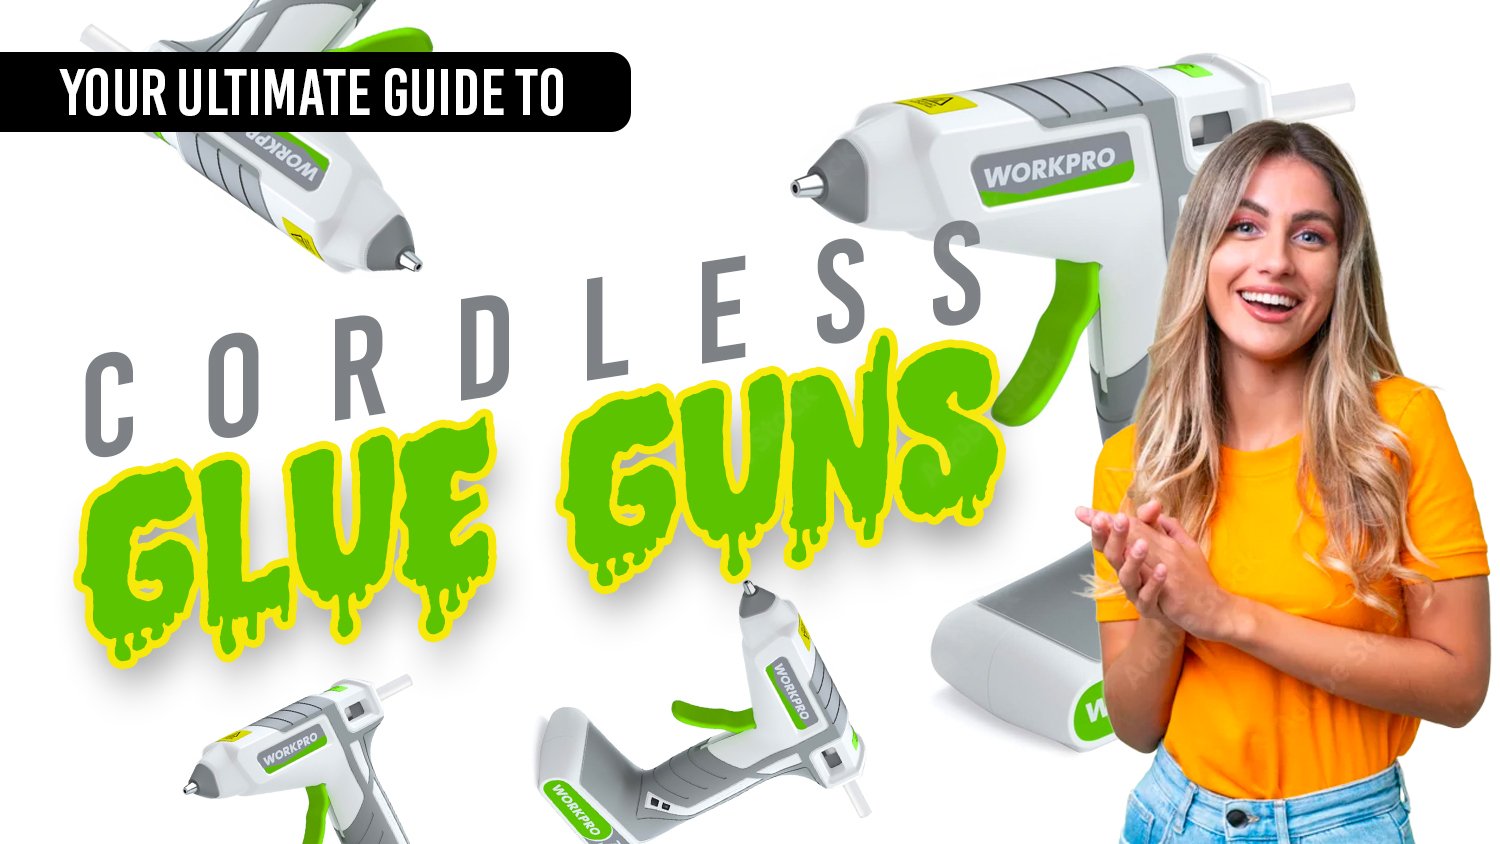 Crafting Convenience: The Advantages of Using a Cordless Glue Gun